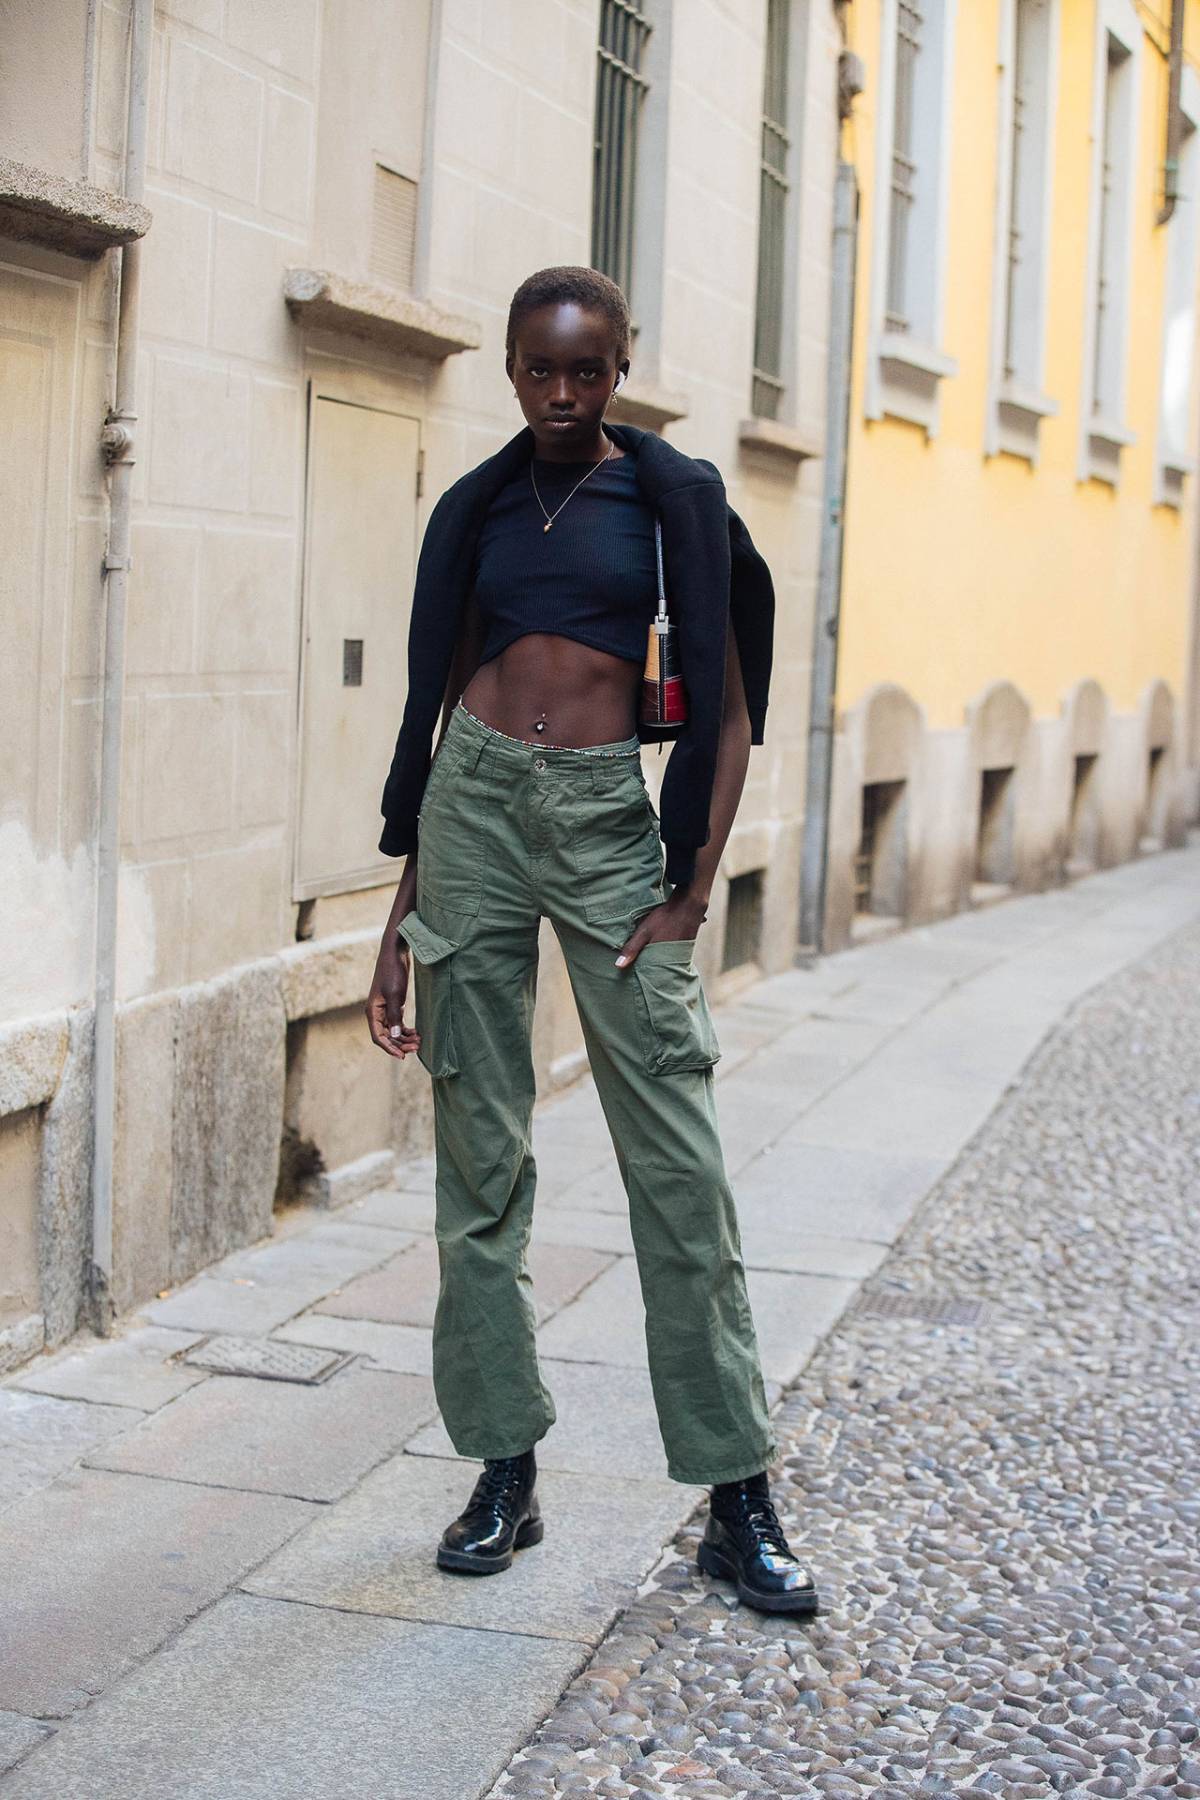 Anyier Anei Cargo Pants Outfits at Milan Fashion Week Spring-Summer 2023